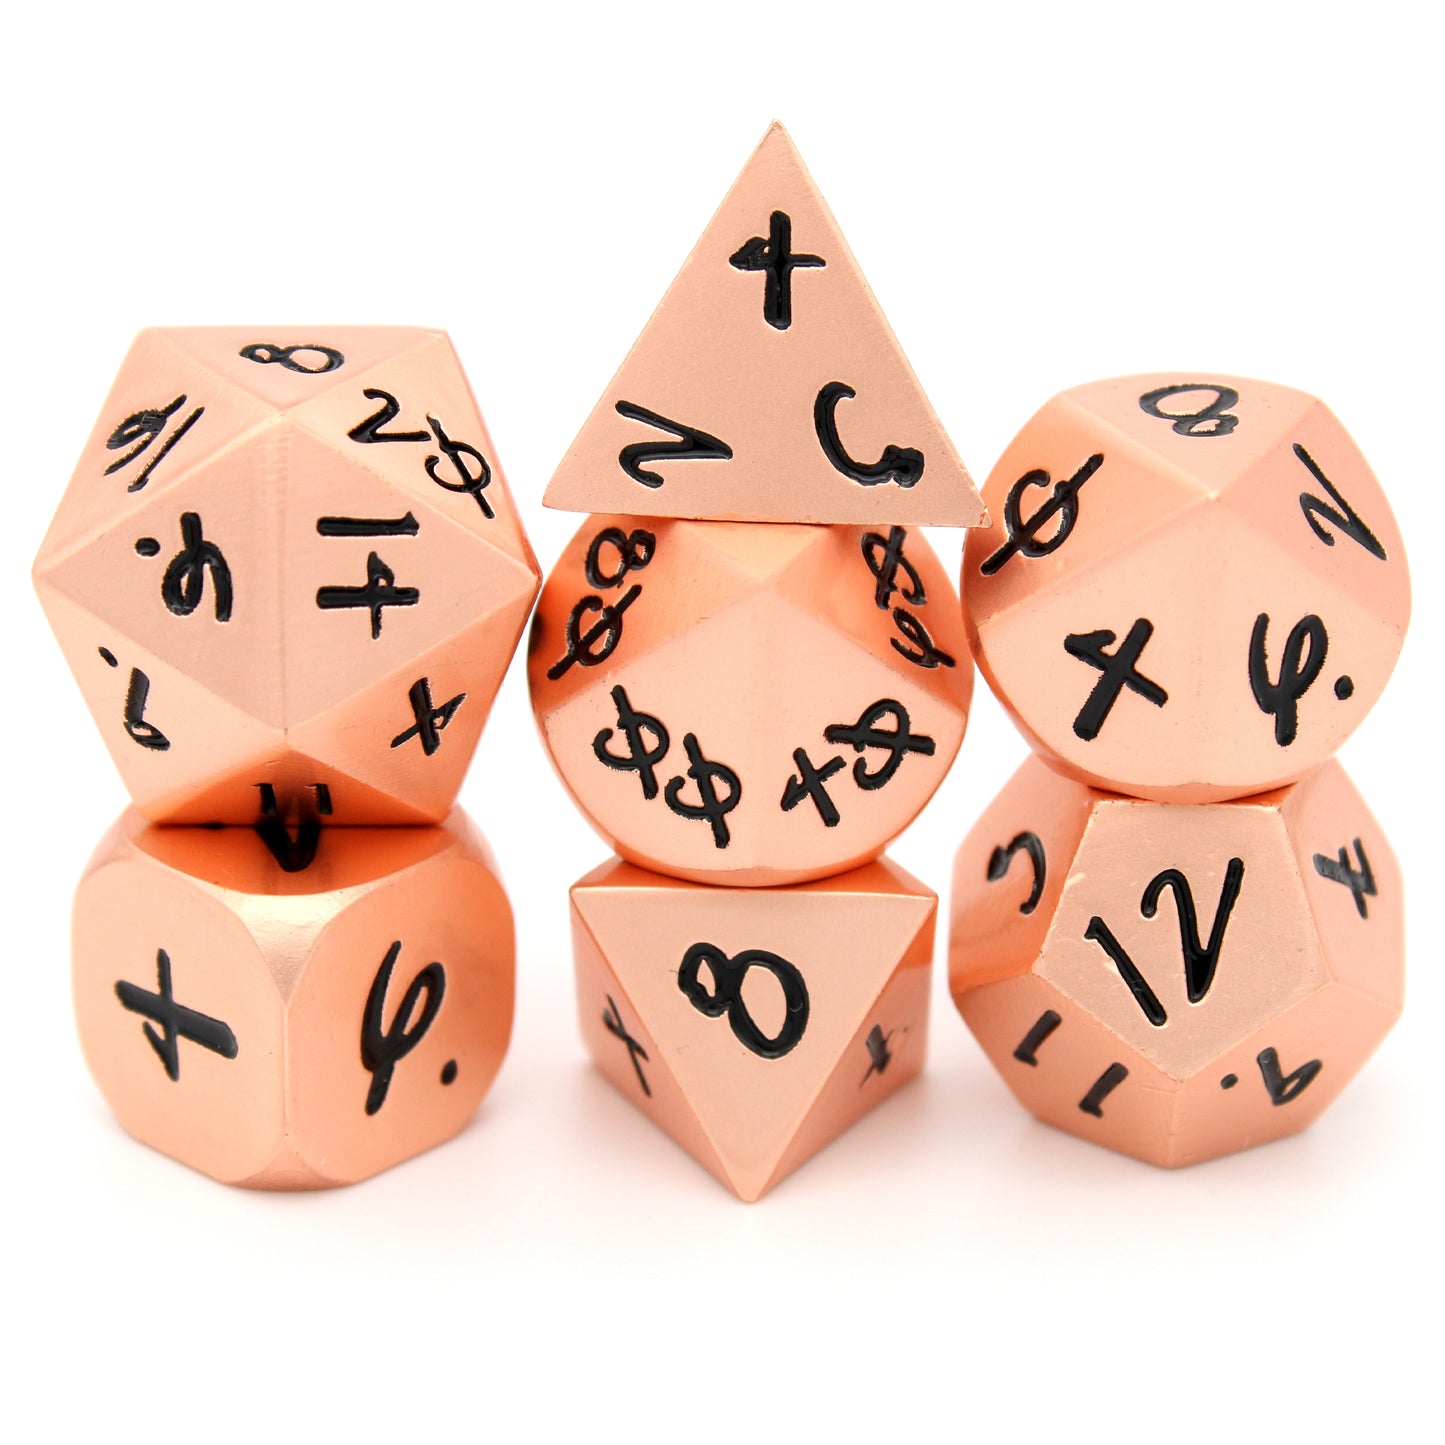 Mage Hand 7pc rose gold metal dice set with black ink